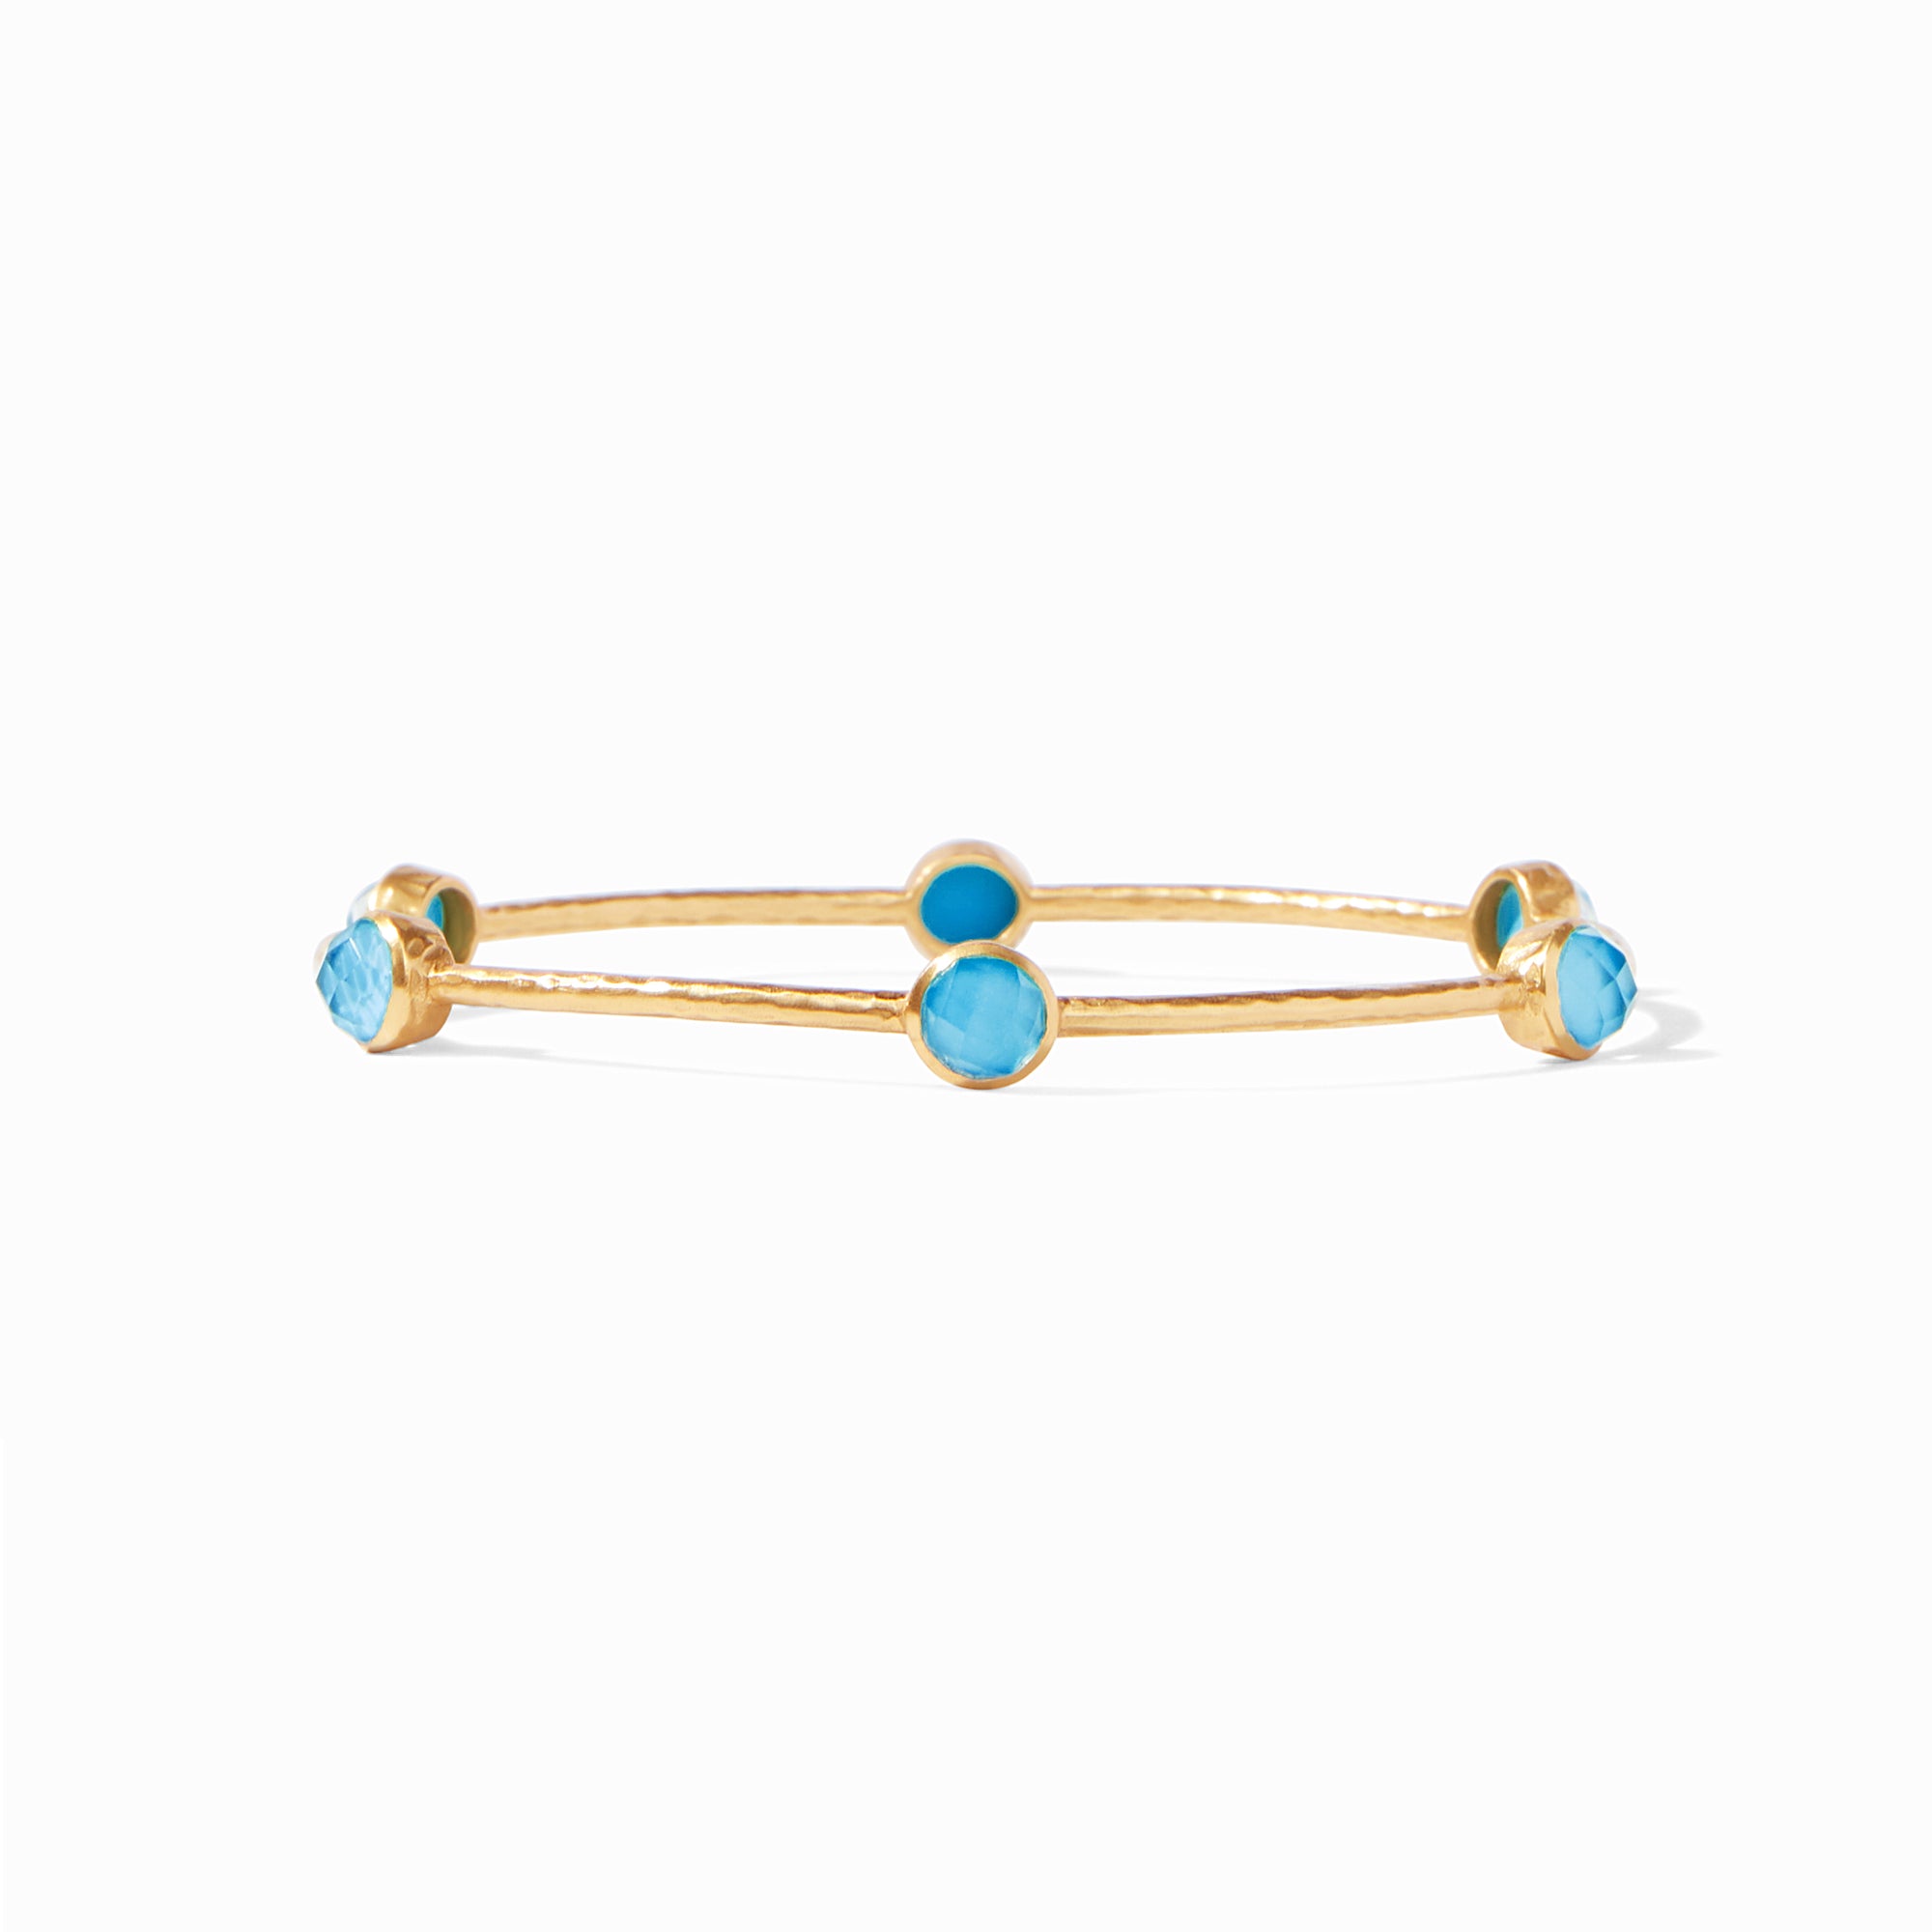 Julie Vos - Milano Luxe Bangle, Iridescent Pacific Blue / Large